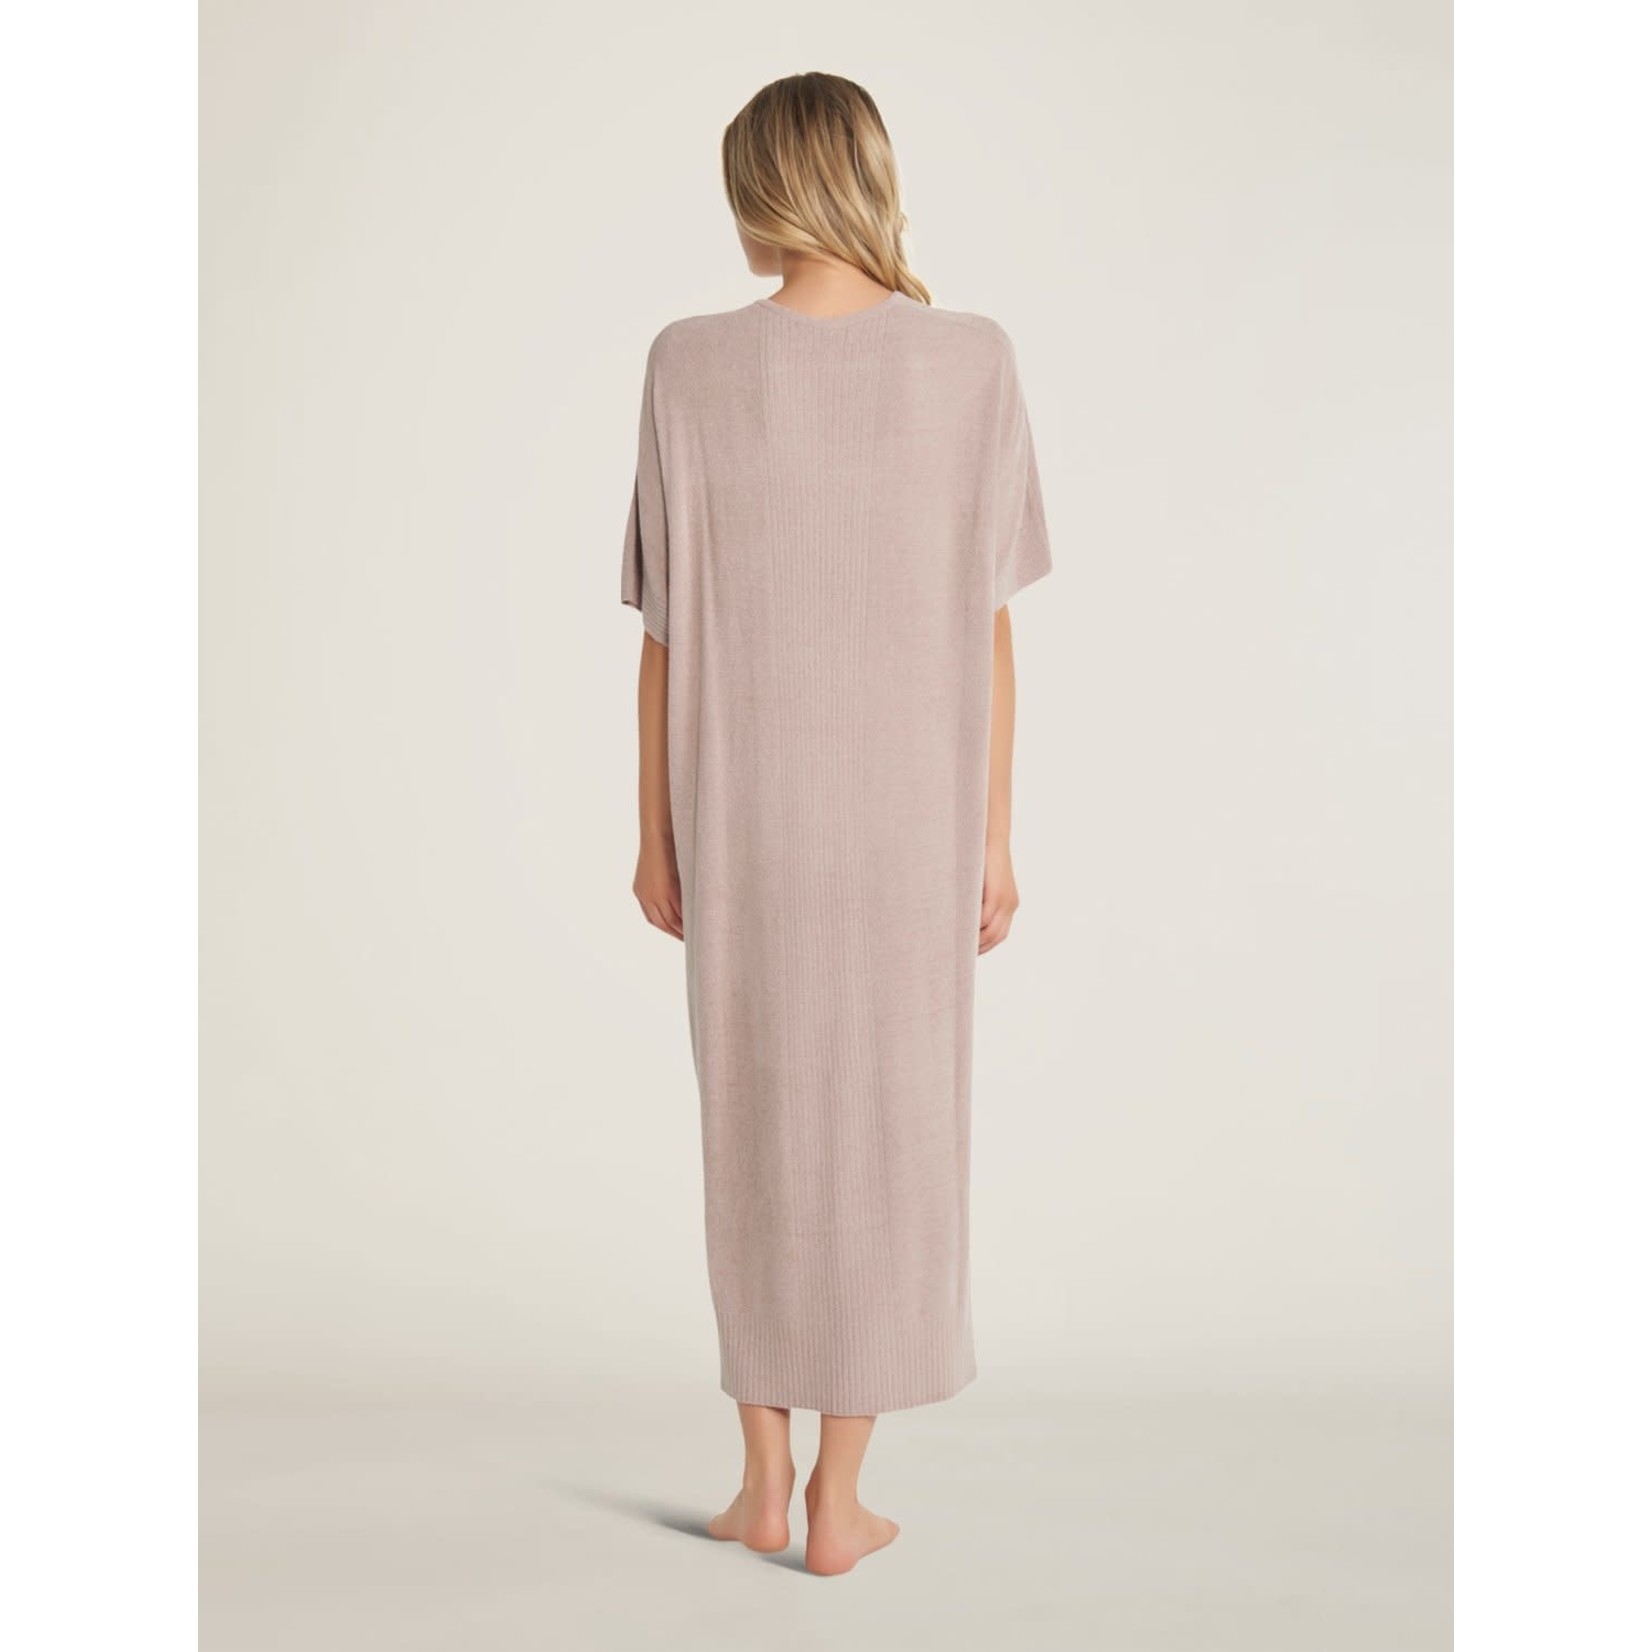 Barefoot Dreams CozyChic Ultra Lite Caftan in Faded Rose OS